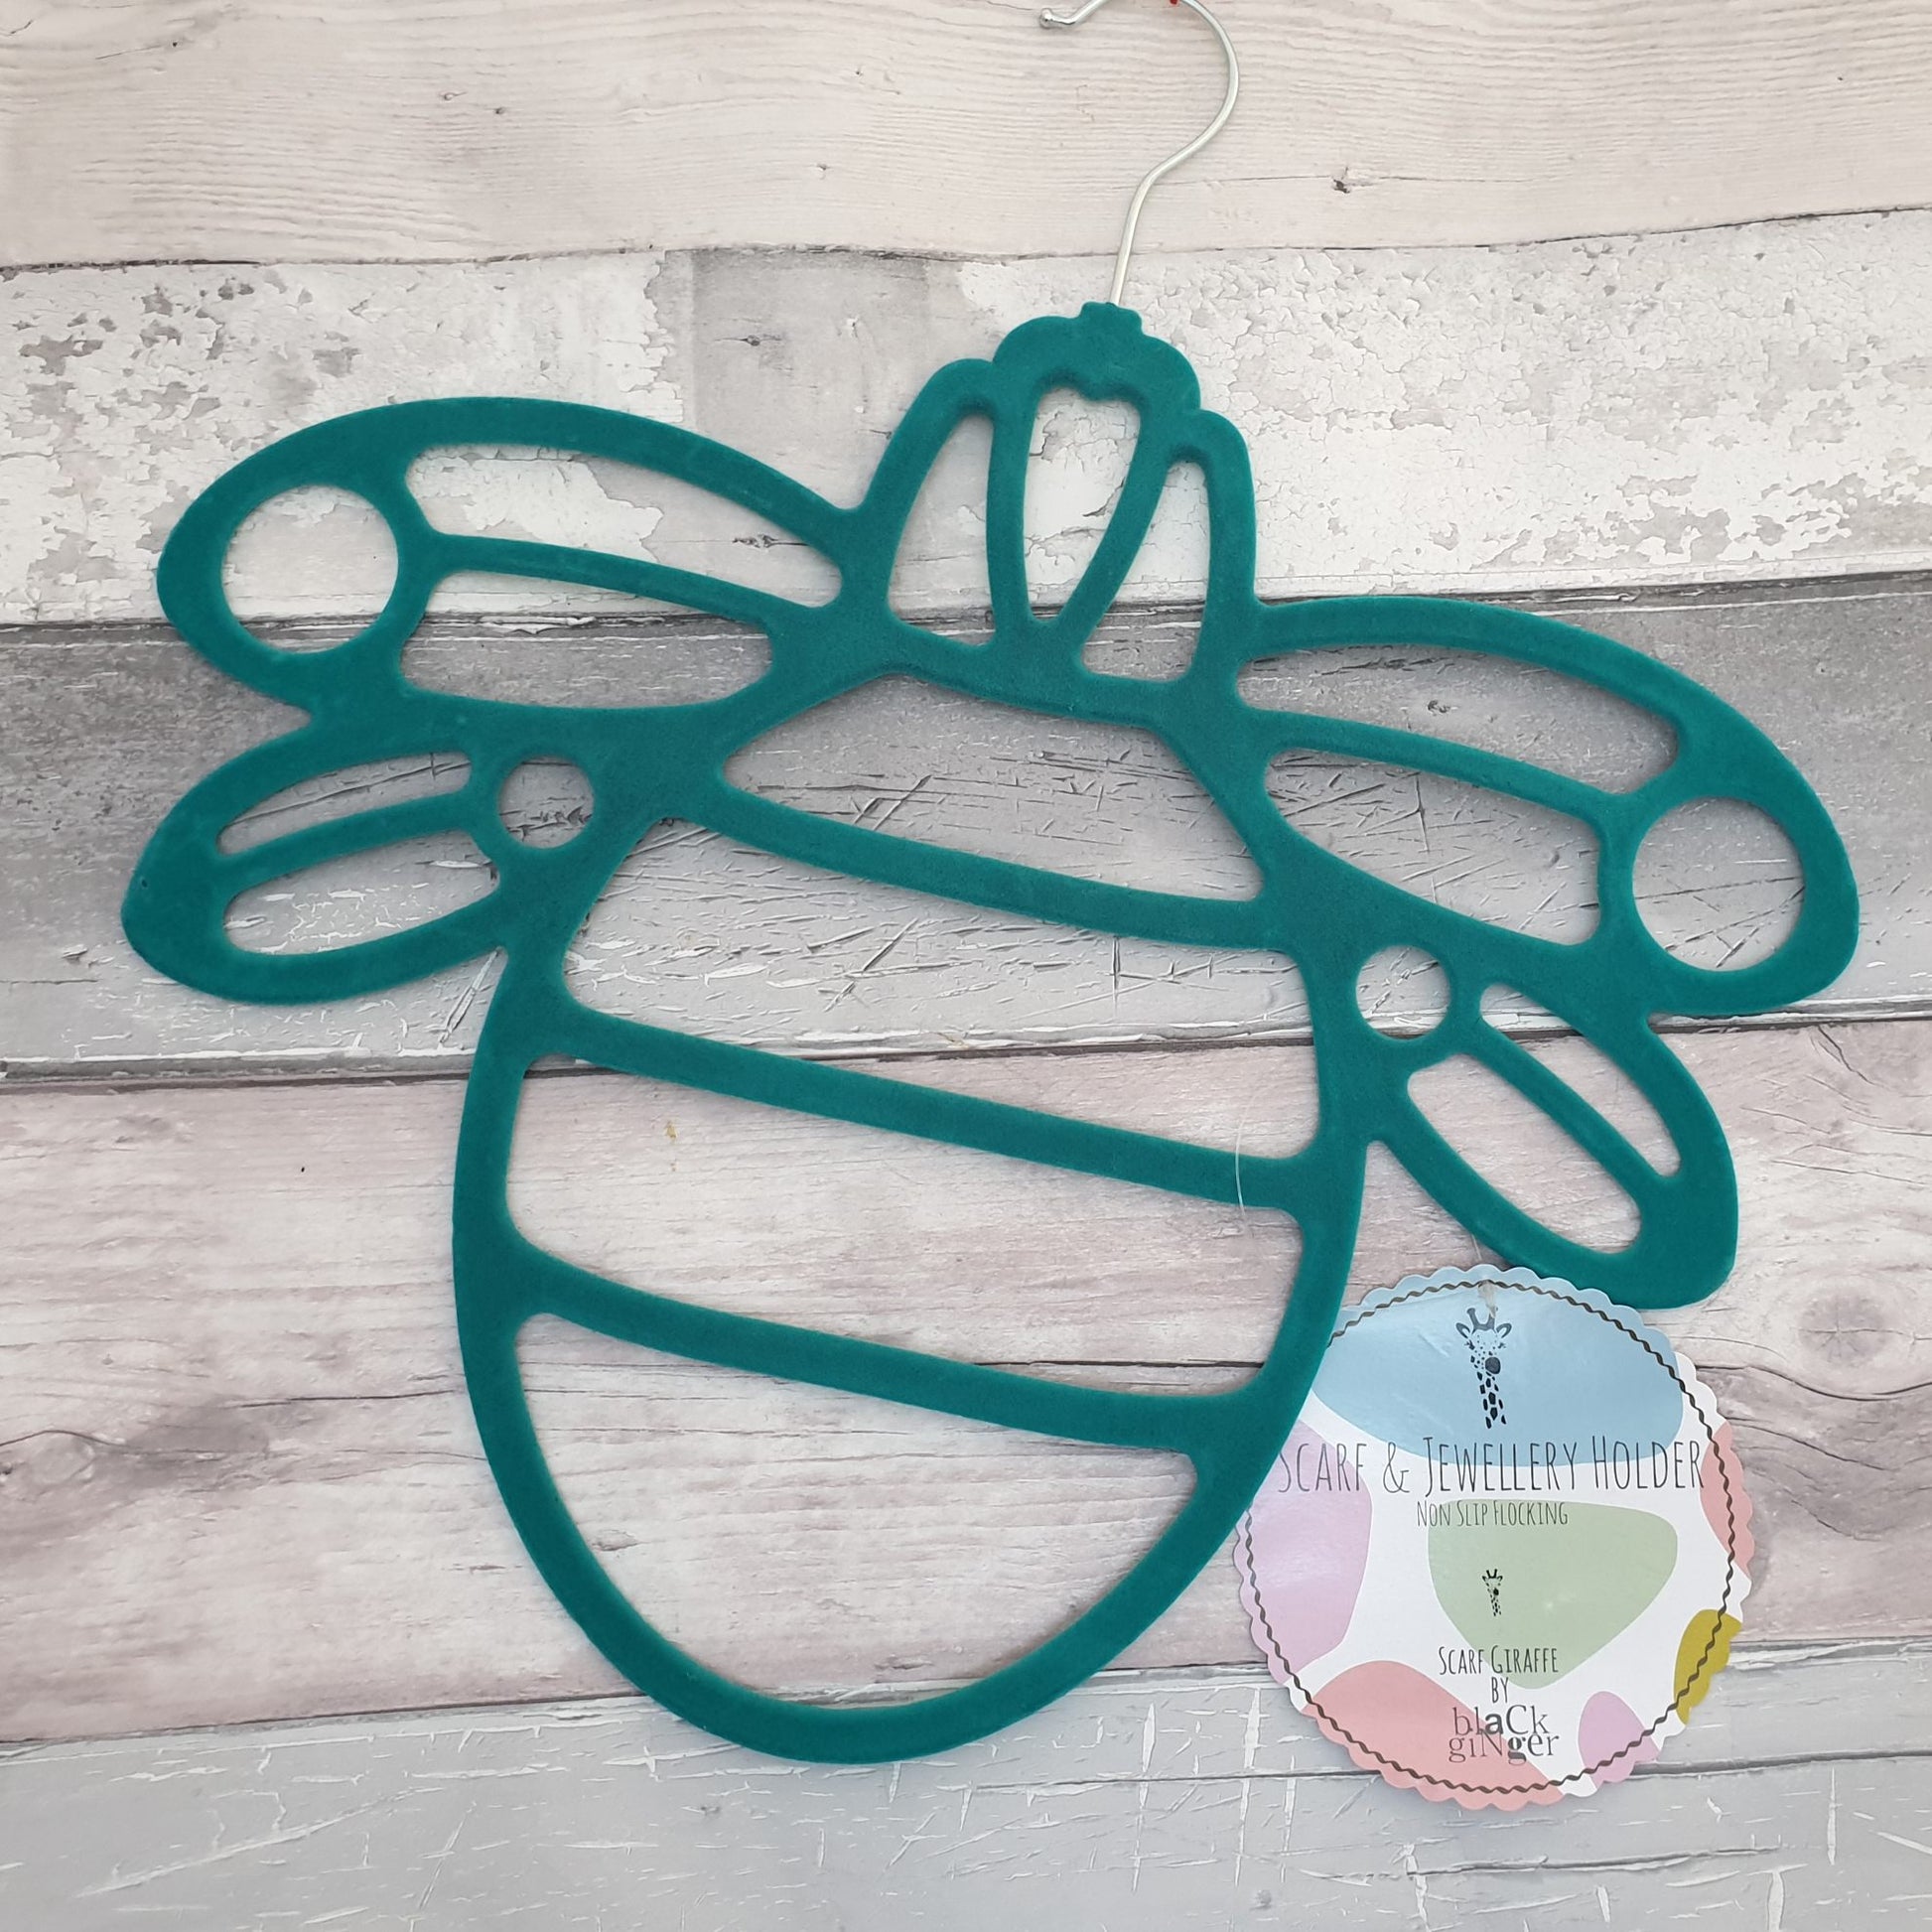 Velvet flocked scarf hanger in the shape of a bee with 19 holes for scarves